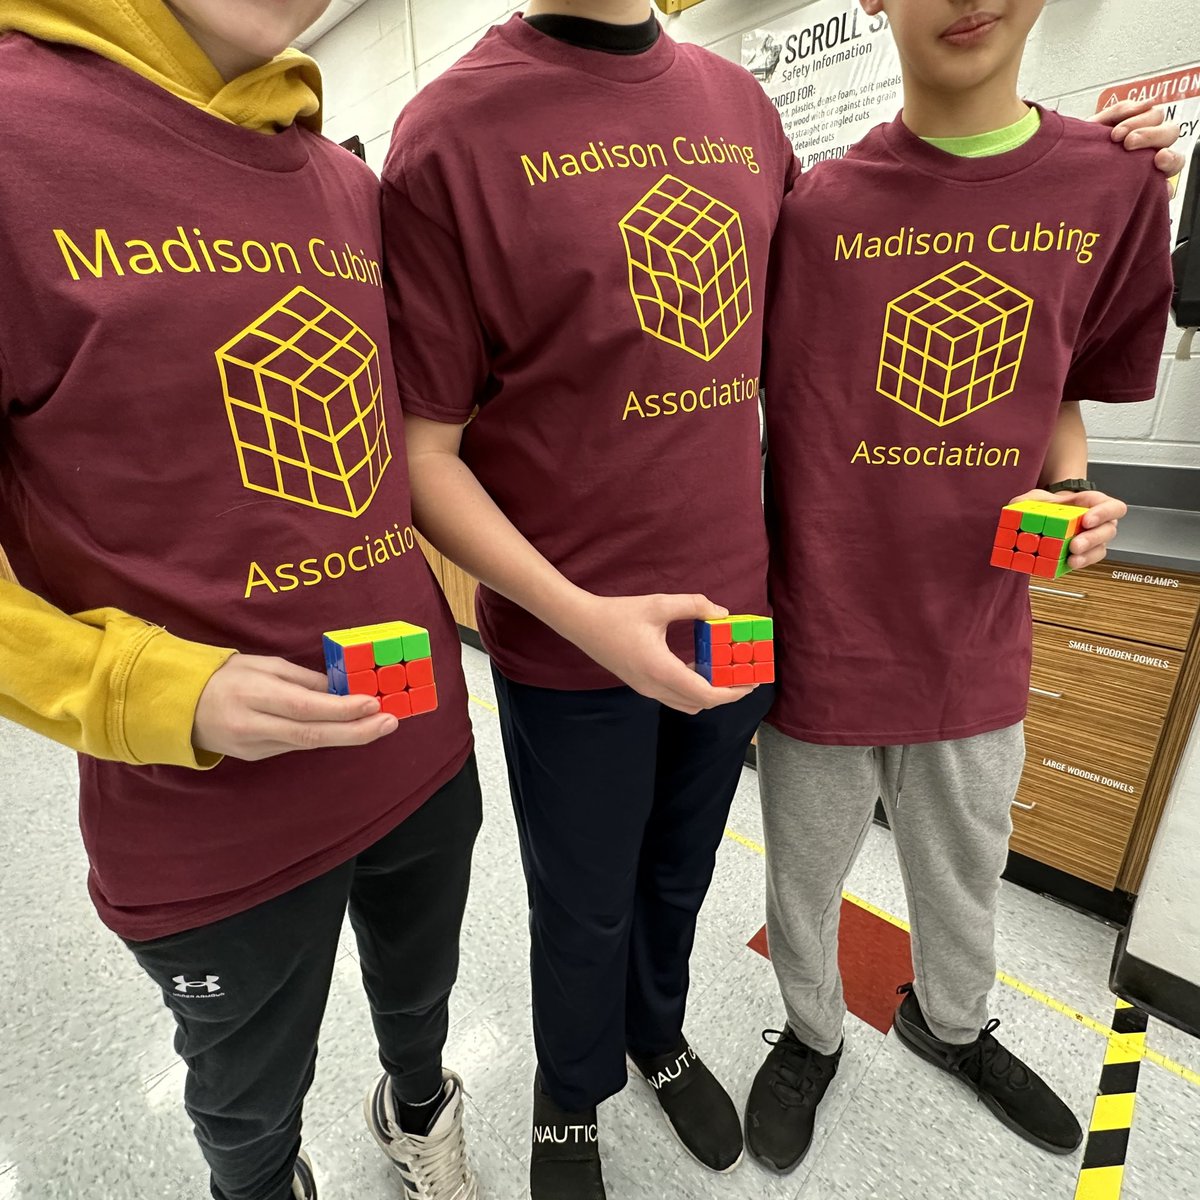 Sharing an awesome #projectoftheday driven by student passions, custom shirts for our #rubikcube club! #makersgonnamake #madisonmakers